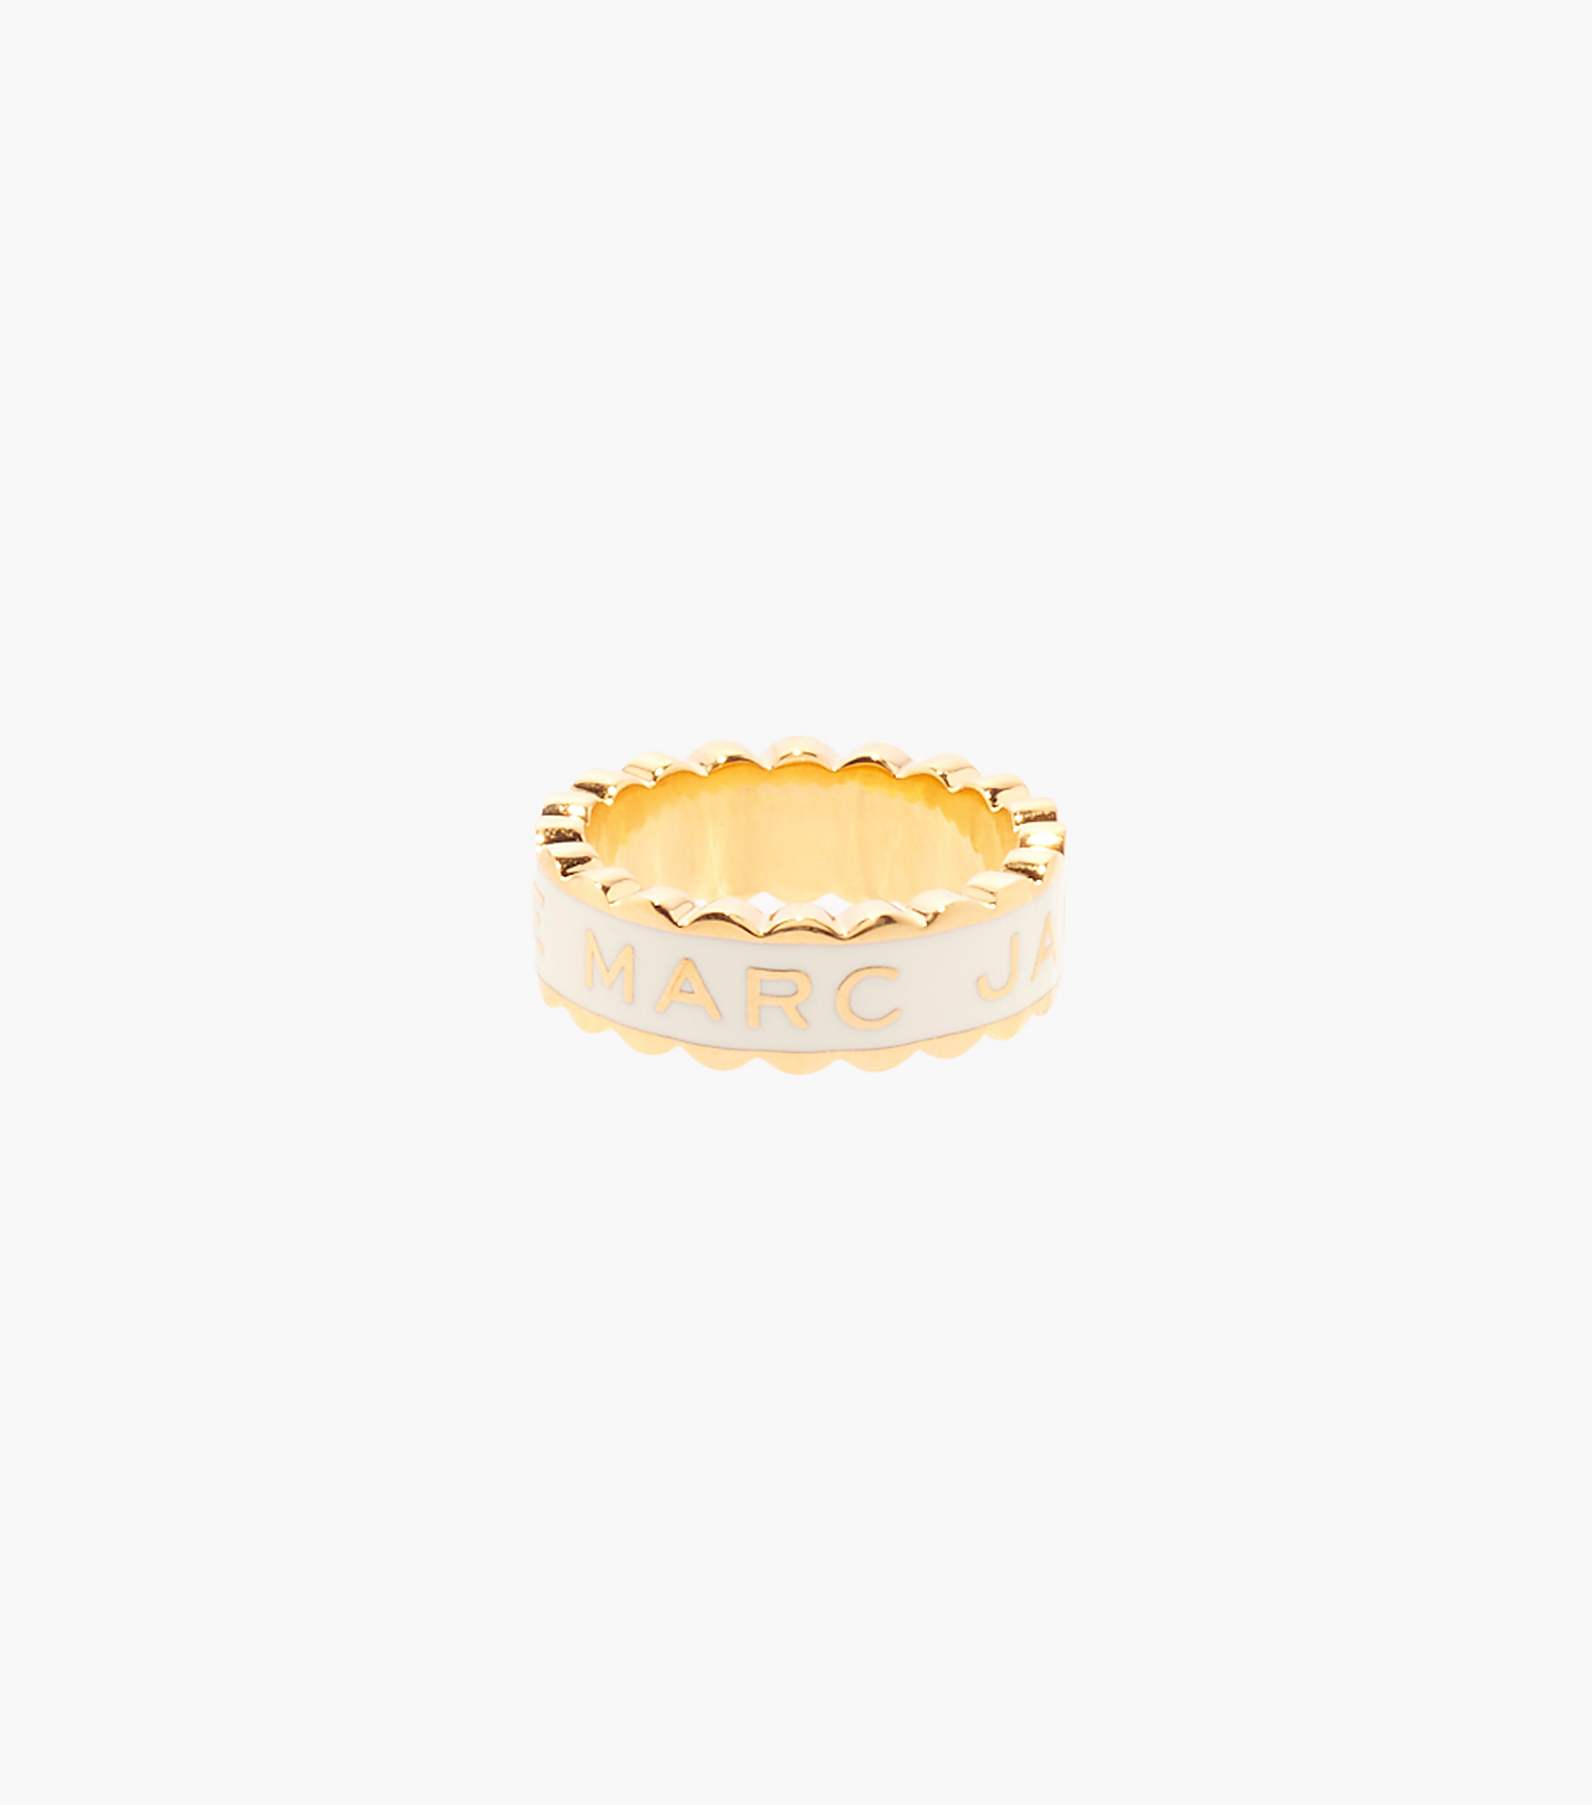 ＊MARC JACOBS ＊The Scallop Medallion リング